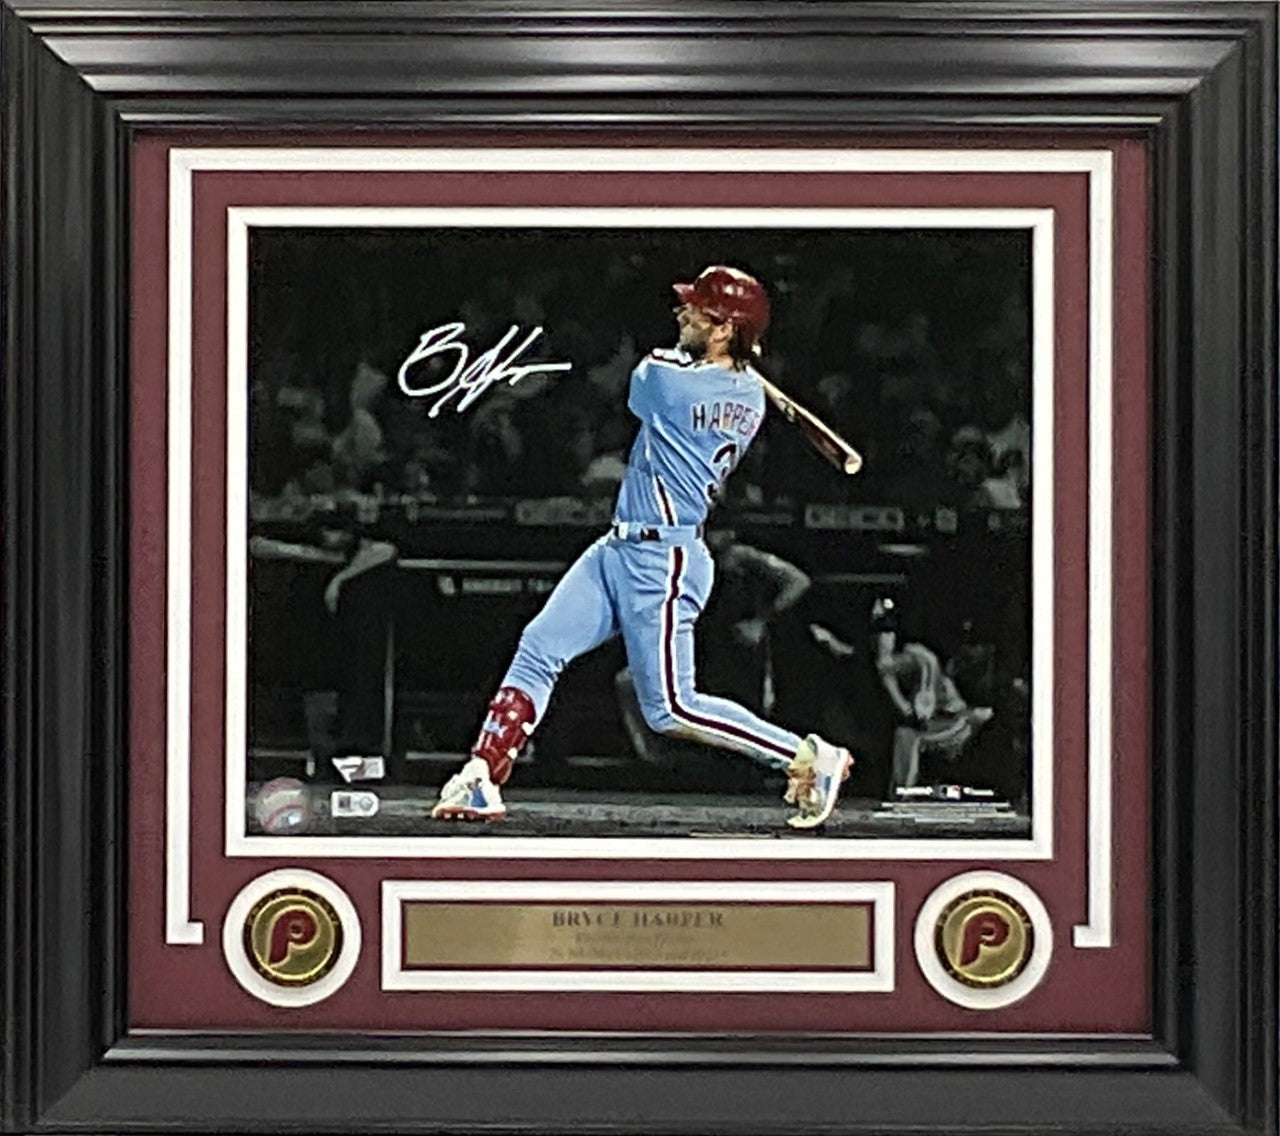 BRYCE HARPER Autographed and inscribed 21 NL MVP Phillies